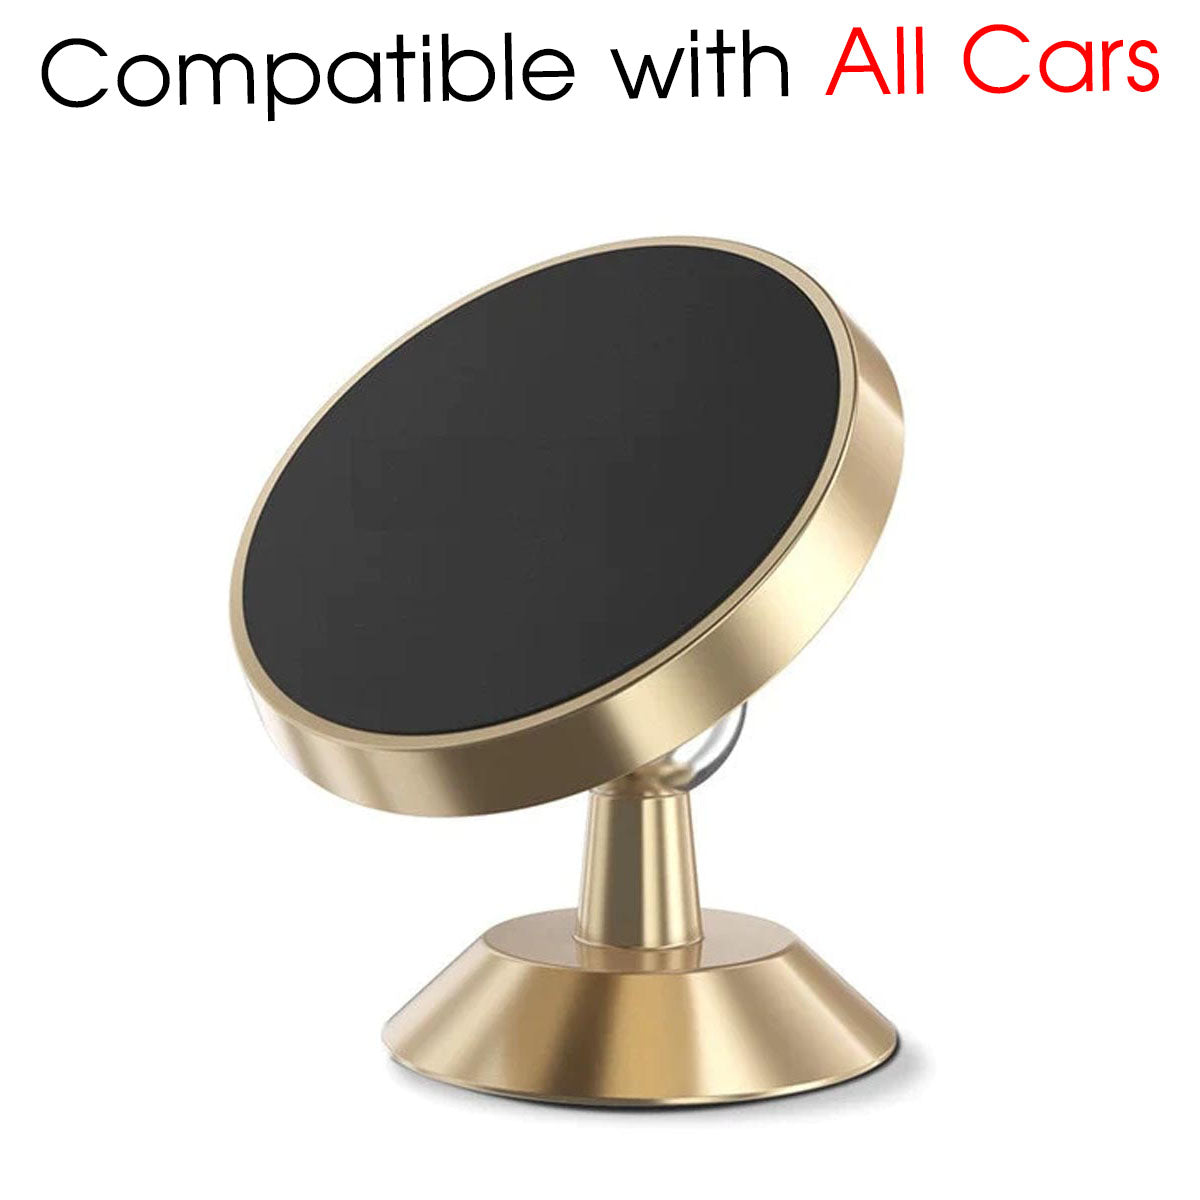 [2 Pack ] Magnetic Phone Mount, Custom For Your Cars, [ Super Strong Magnet ] [ with 4 Metal Plate ] car Magnetic Phone Holder, [ 360° Rotation ] Universal Dashboard car Mount Fits All Cell Phones, Car Accessories HY13982